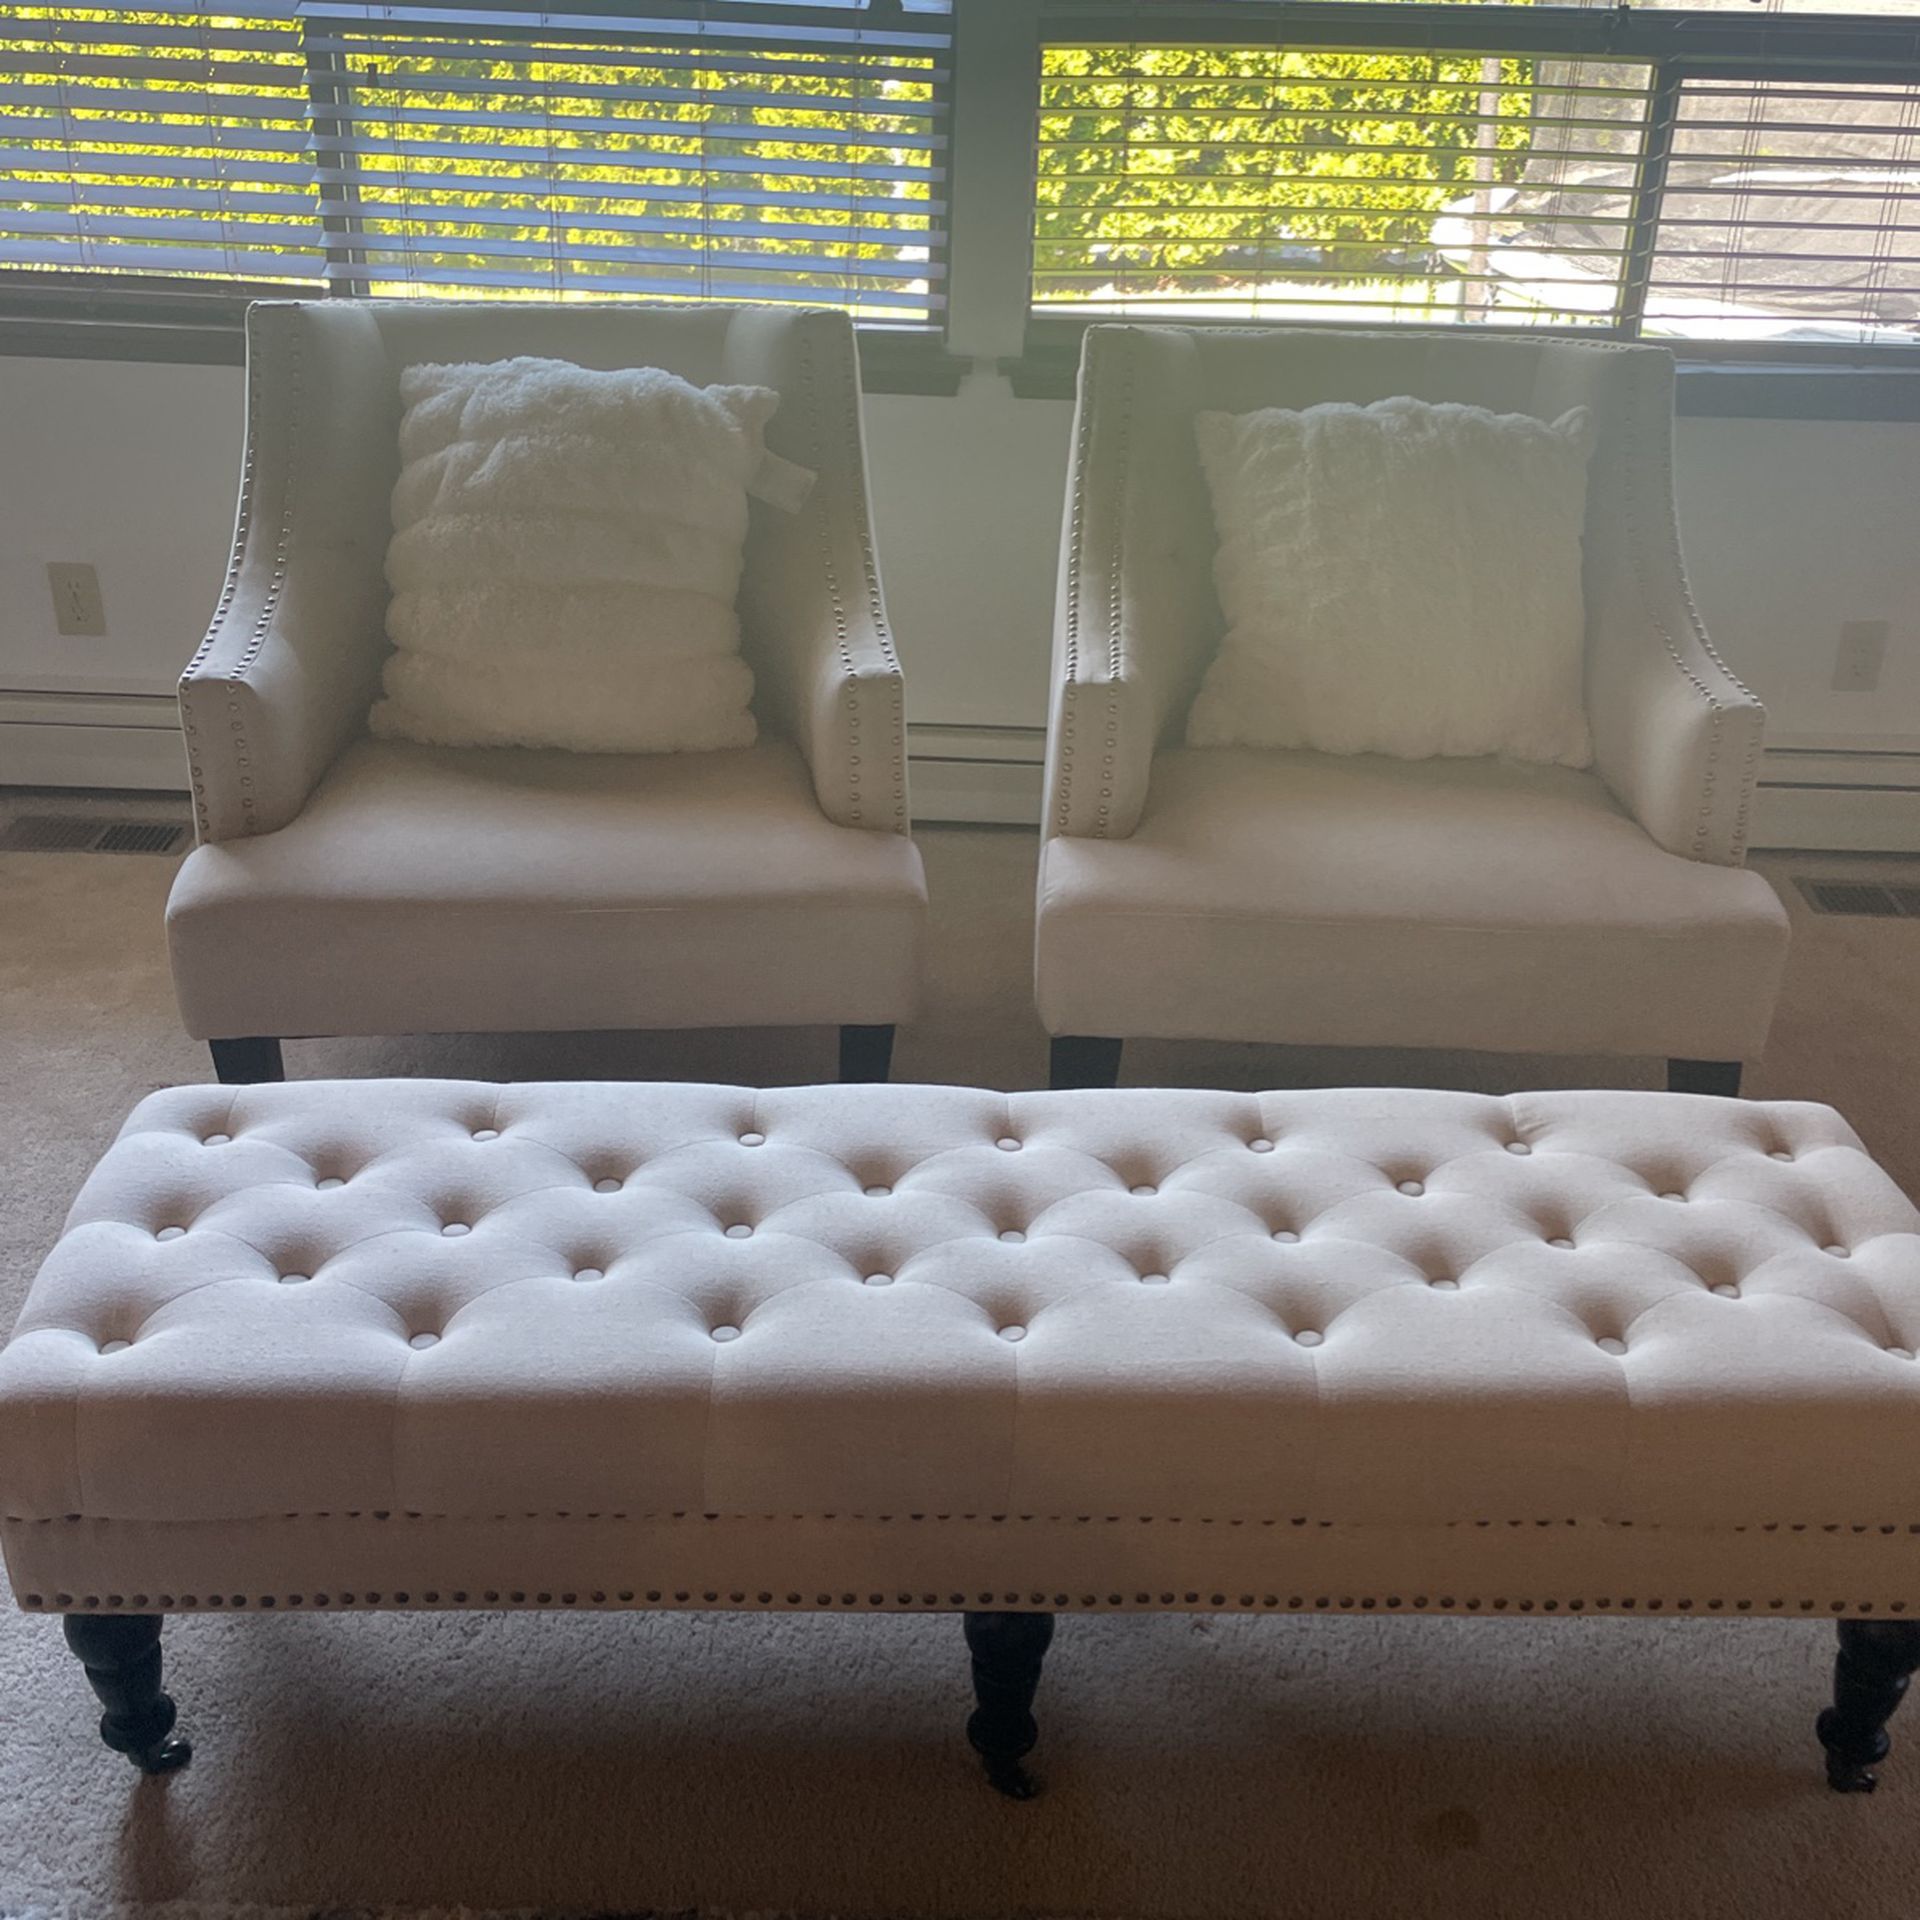 Asking $550 For Bench, Dining Chairs 6,and 2 Lounge Chairs Excellent Condition 